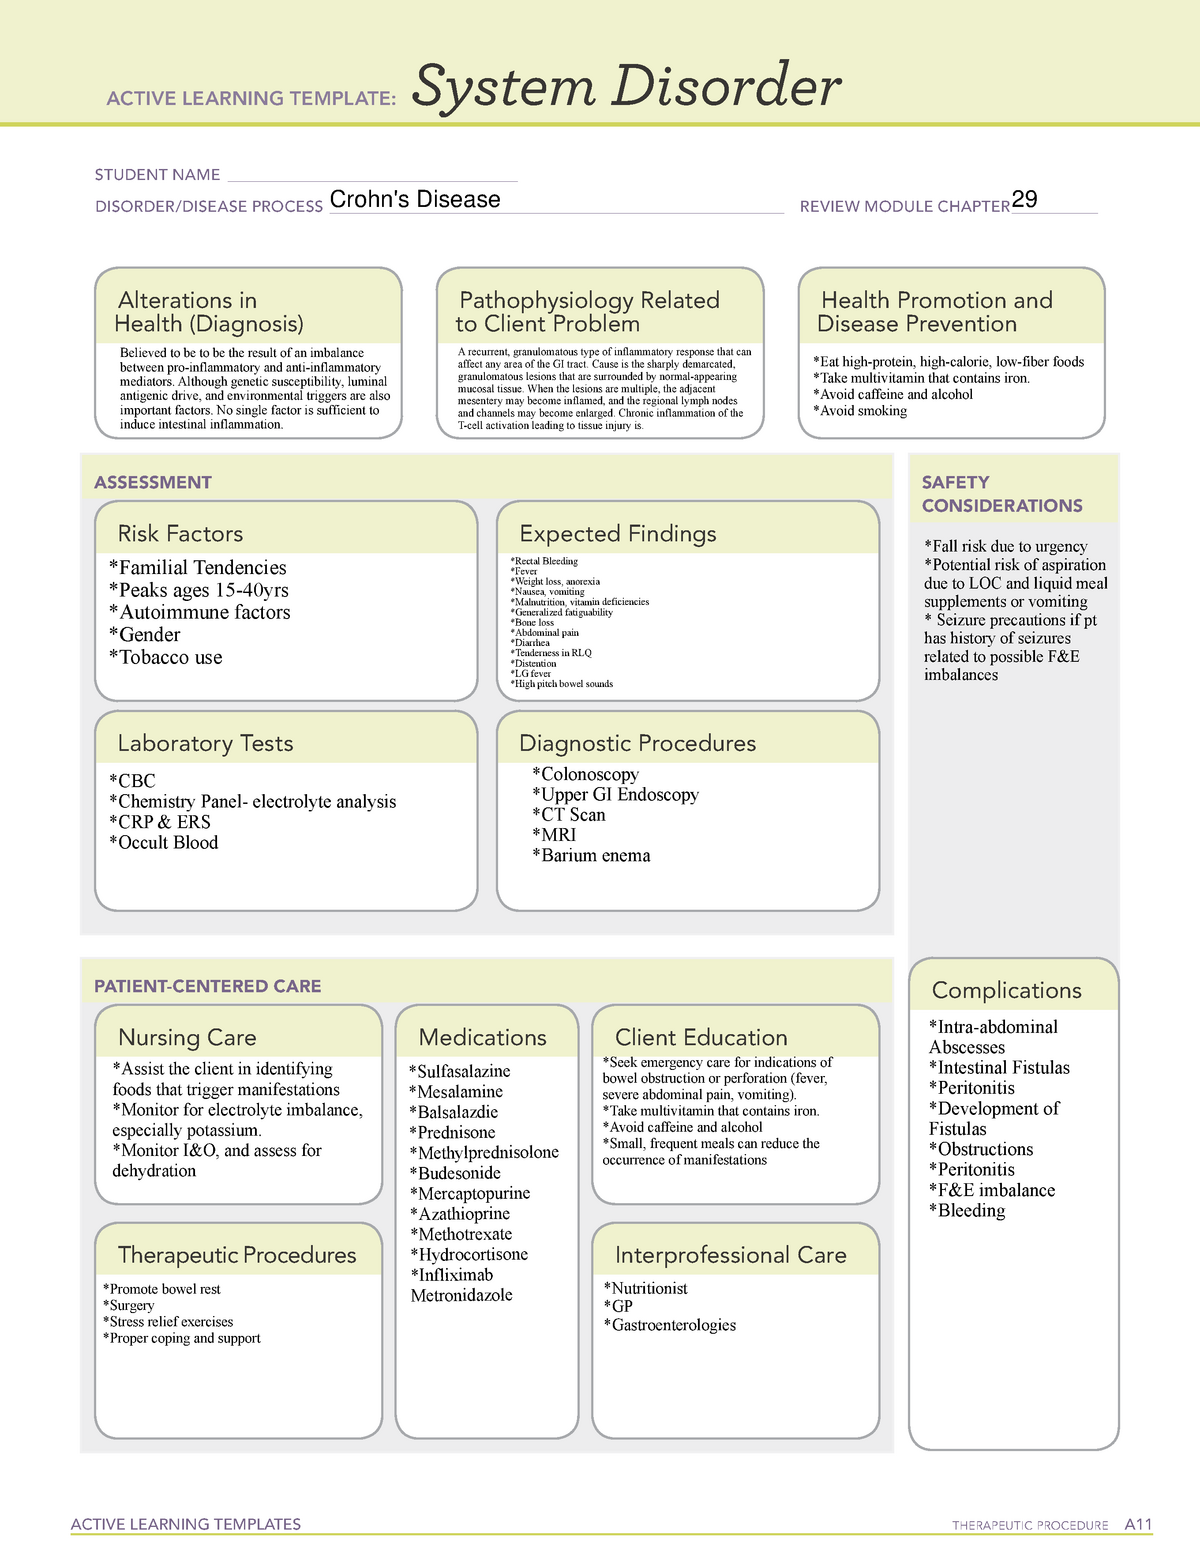 Crohn's Disease (1)1.pdf ACTIVE LEARNING TEMPLATES THERAPEUTIC